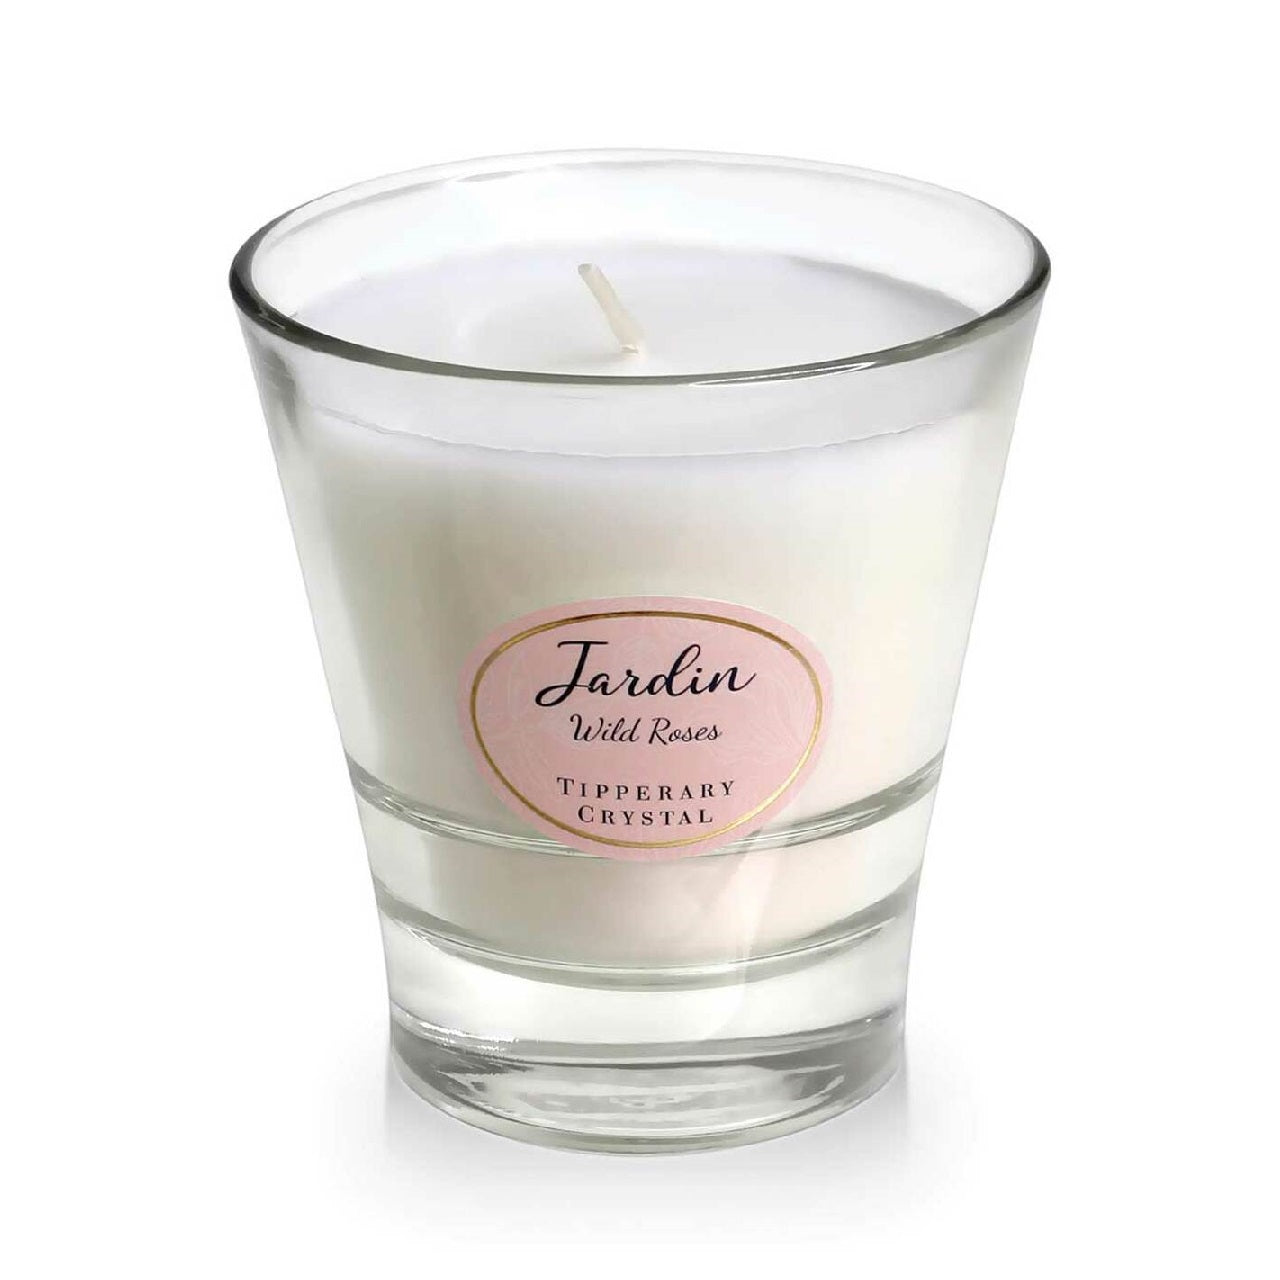 Tipperary Crystal Wild Roses Jardin Collection Candle  The new Jardin Candle Collection from Tipperary Crystal.  Wild Roses The scent of Wild Rose evokes the feeling of being in a beautiful summer garden. This scent has a predominantly balsamic, spicy, warm scent intertwined with the bouquet of warm earth and honey. While similar to our ever popular Red Roses, Wild Roses has a more earthy spicy tone creating a mystical, more intriguing bouquet.